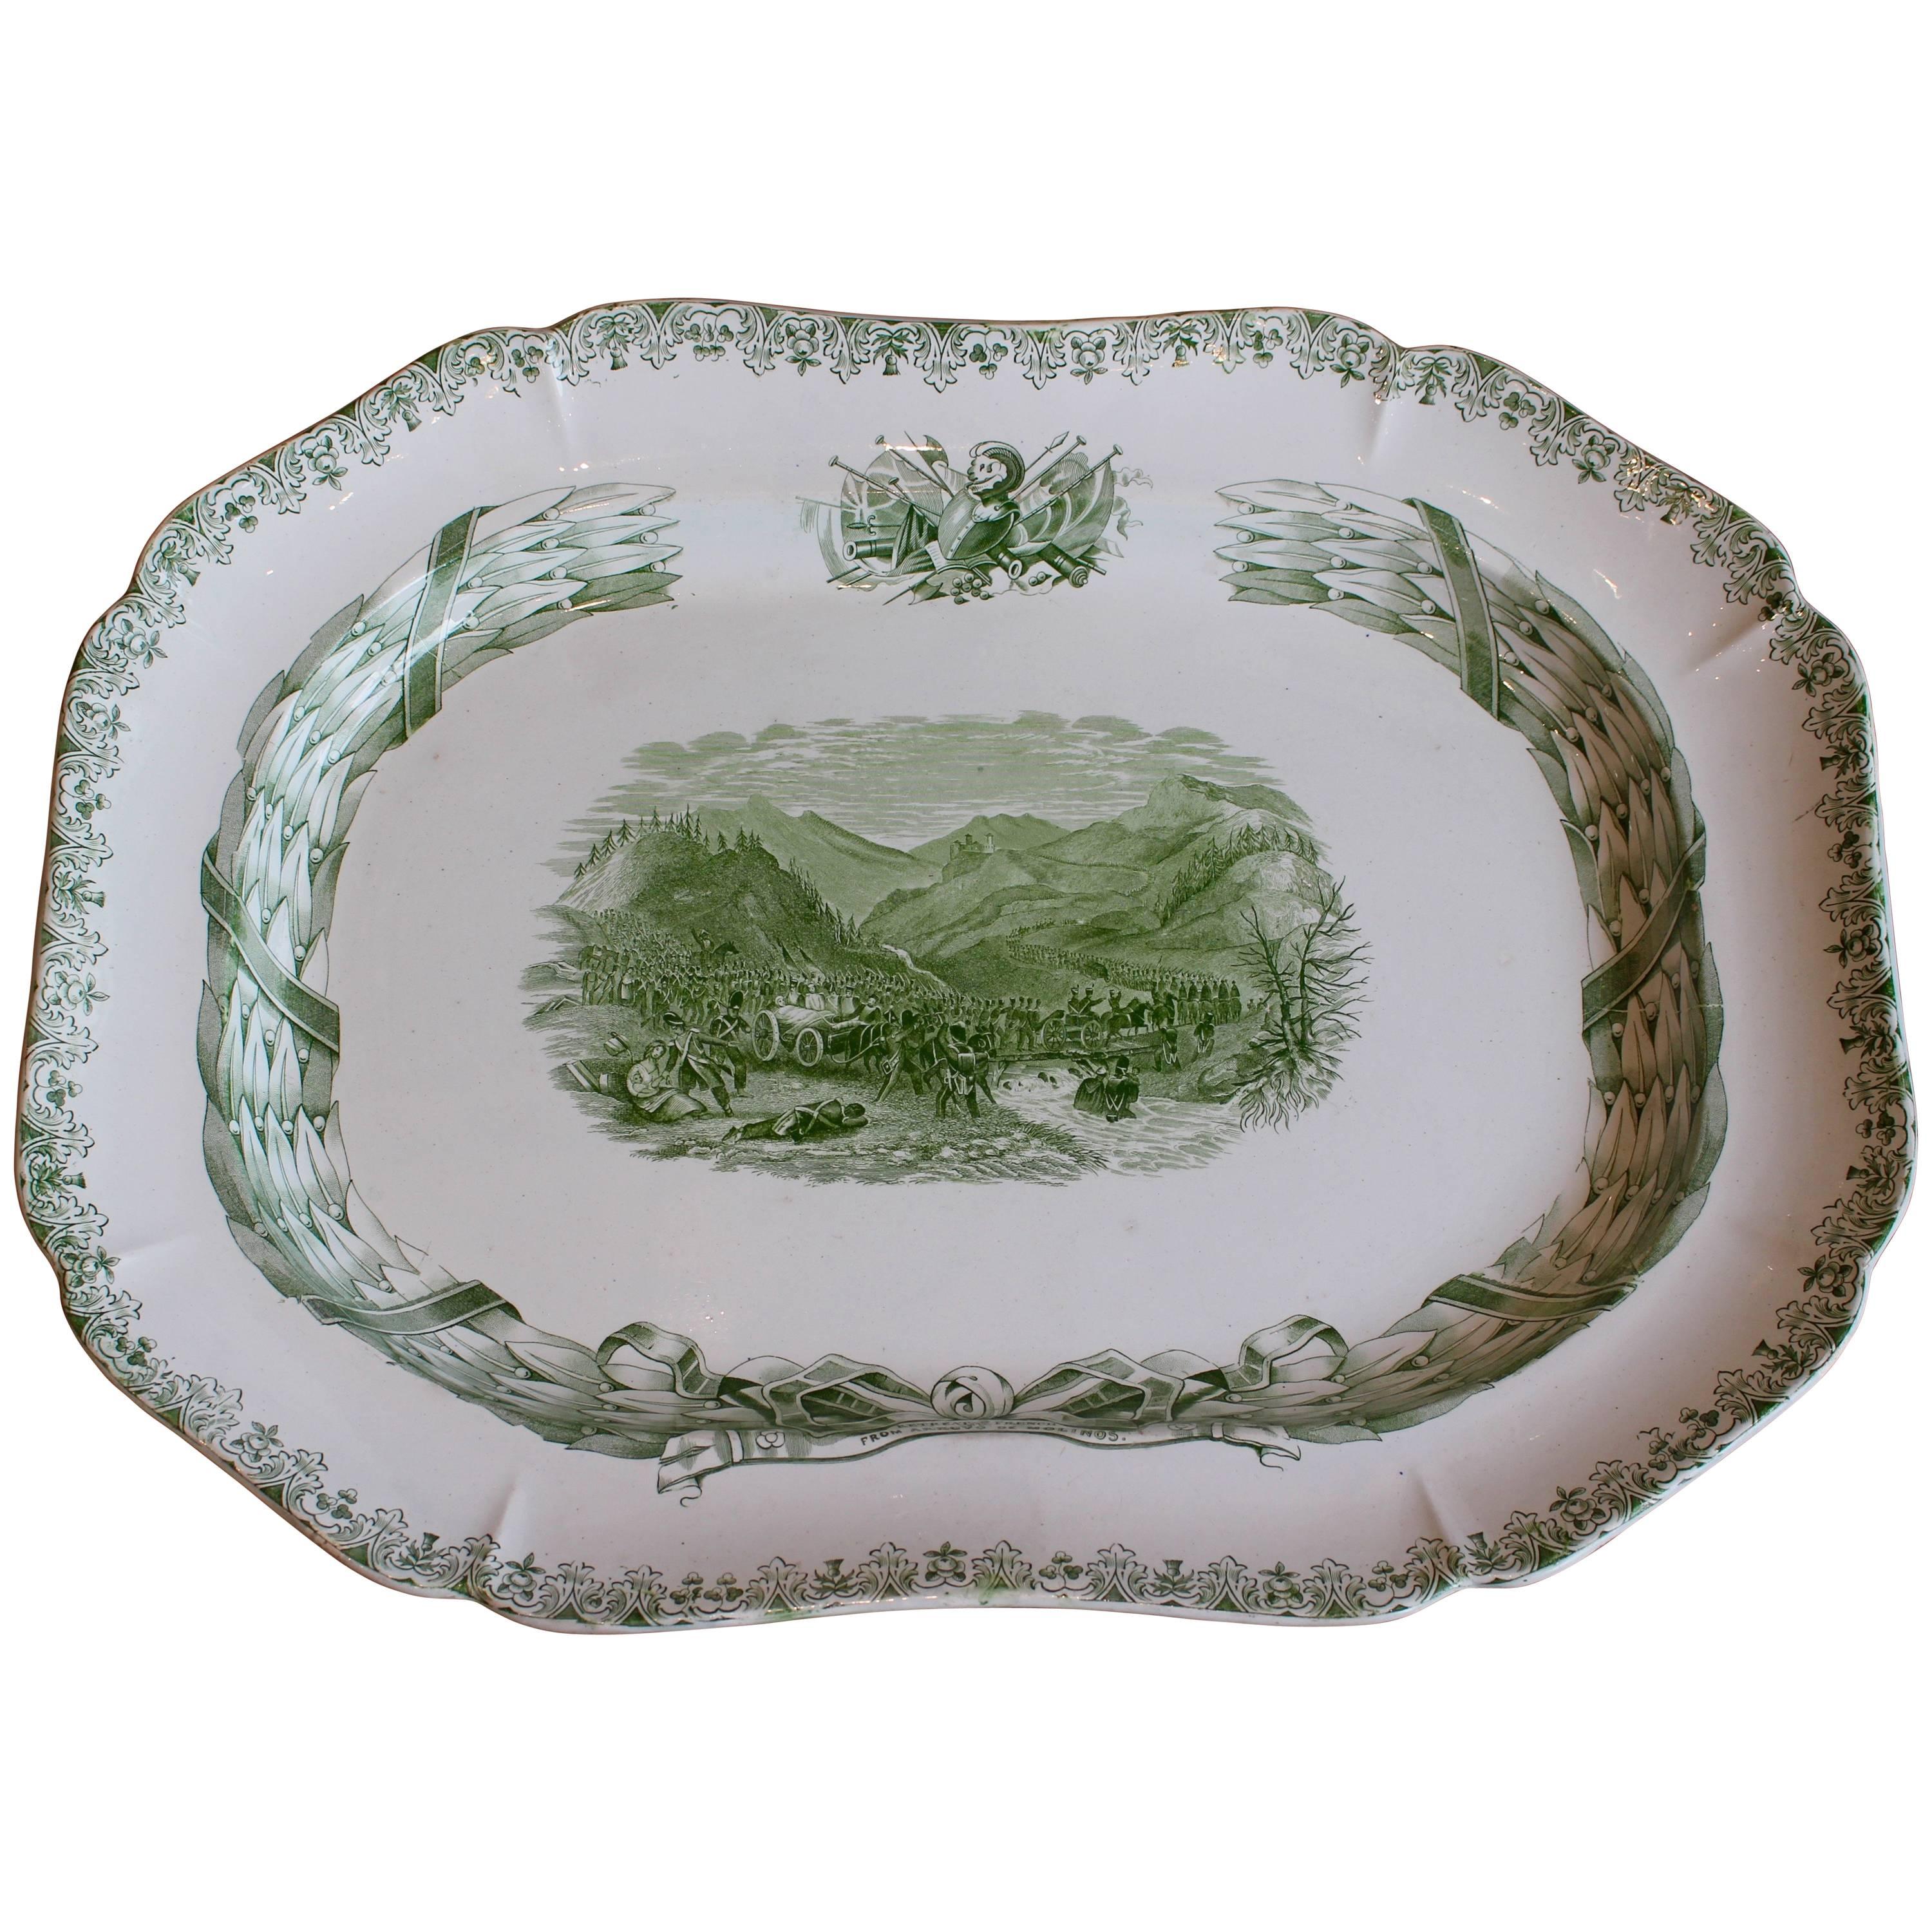 Large Green and White Platter Commemorating a Victorious Battle